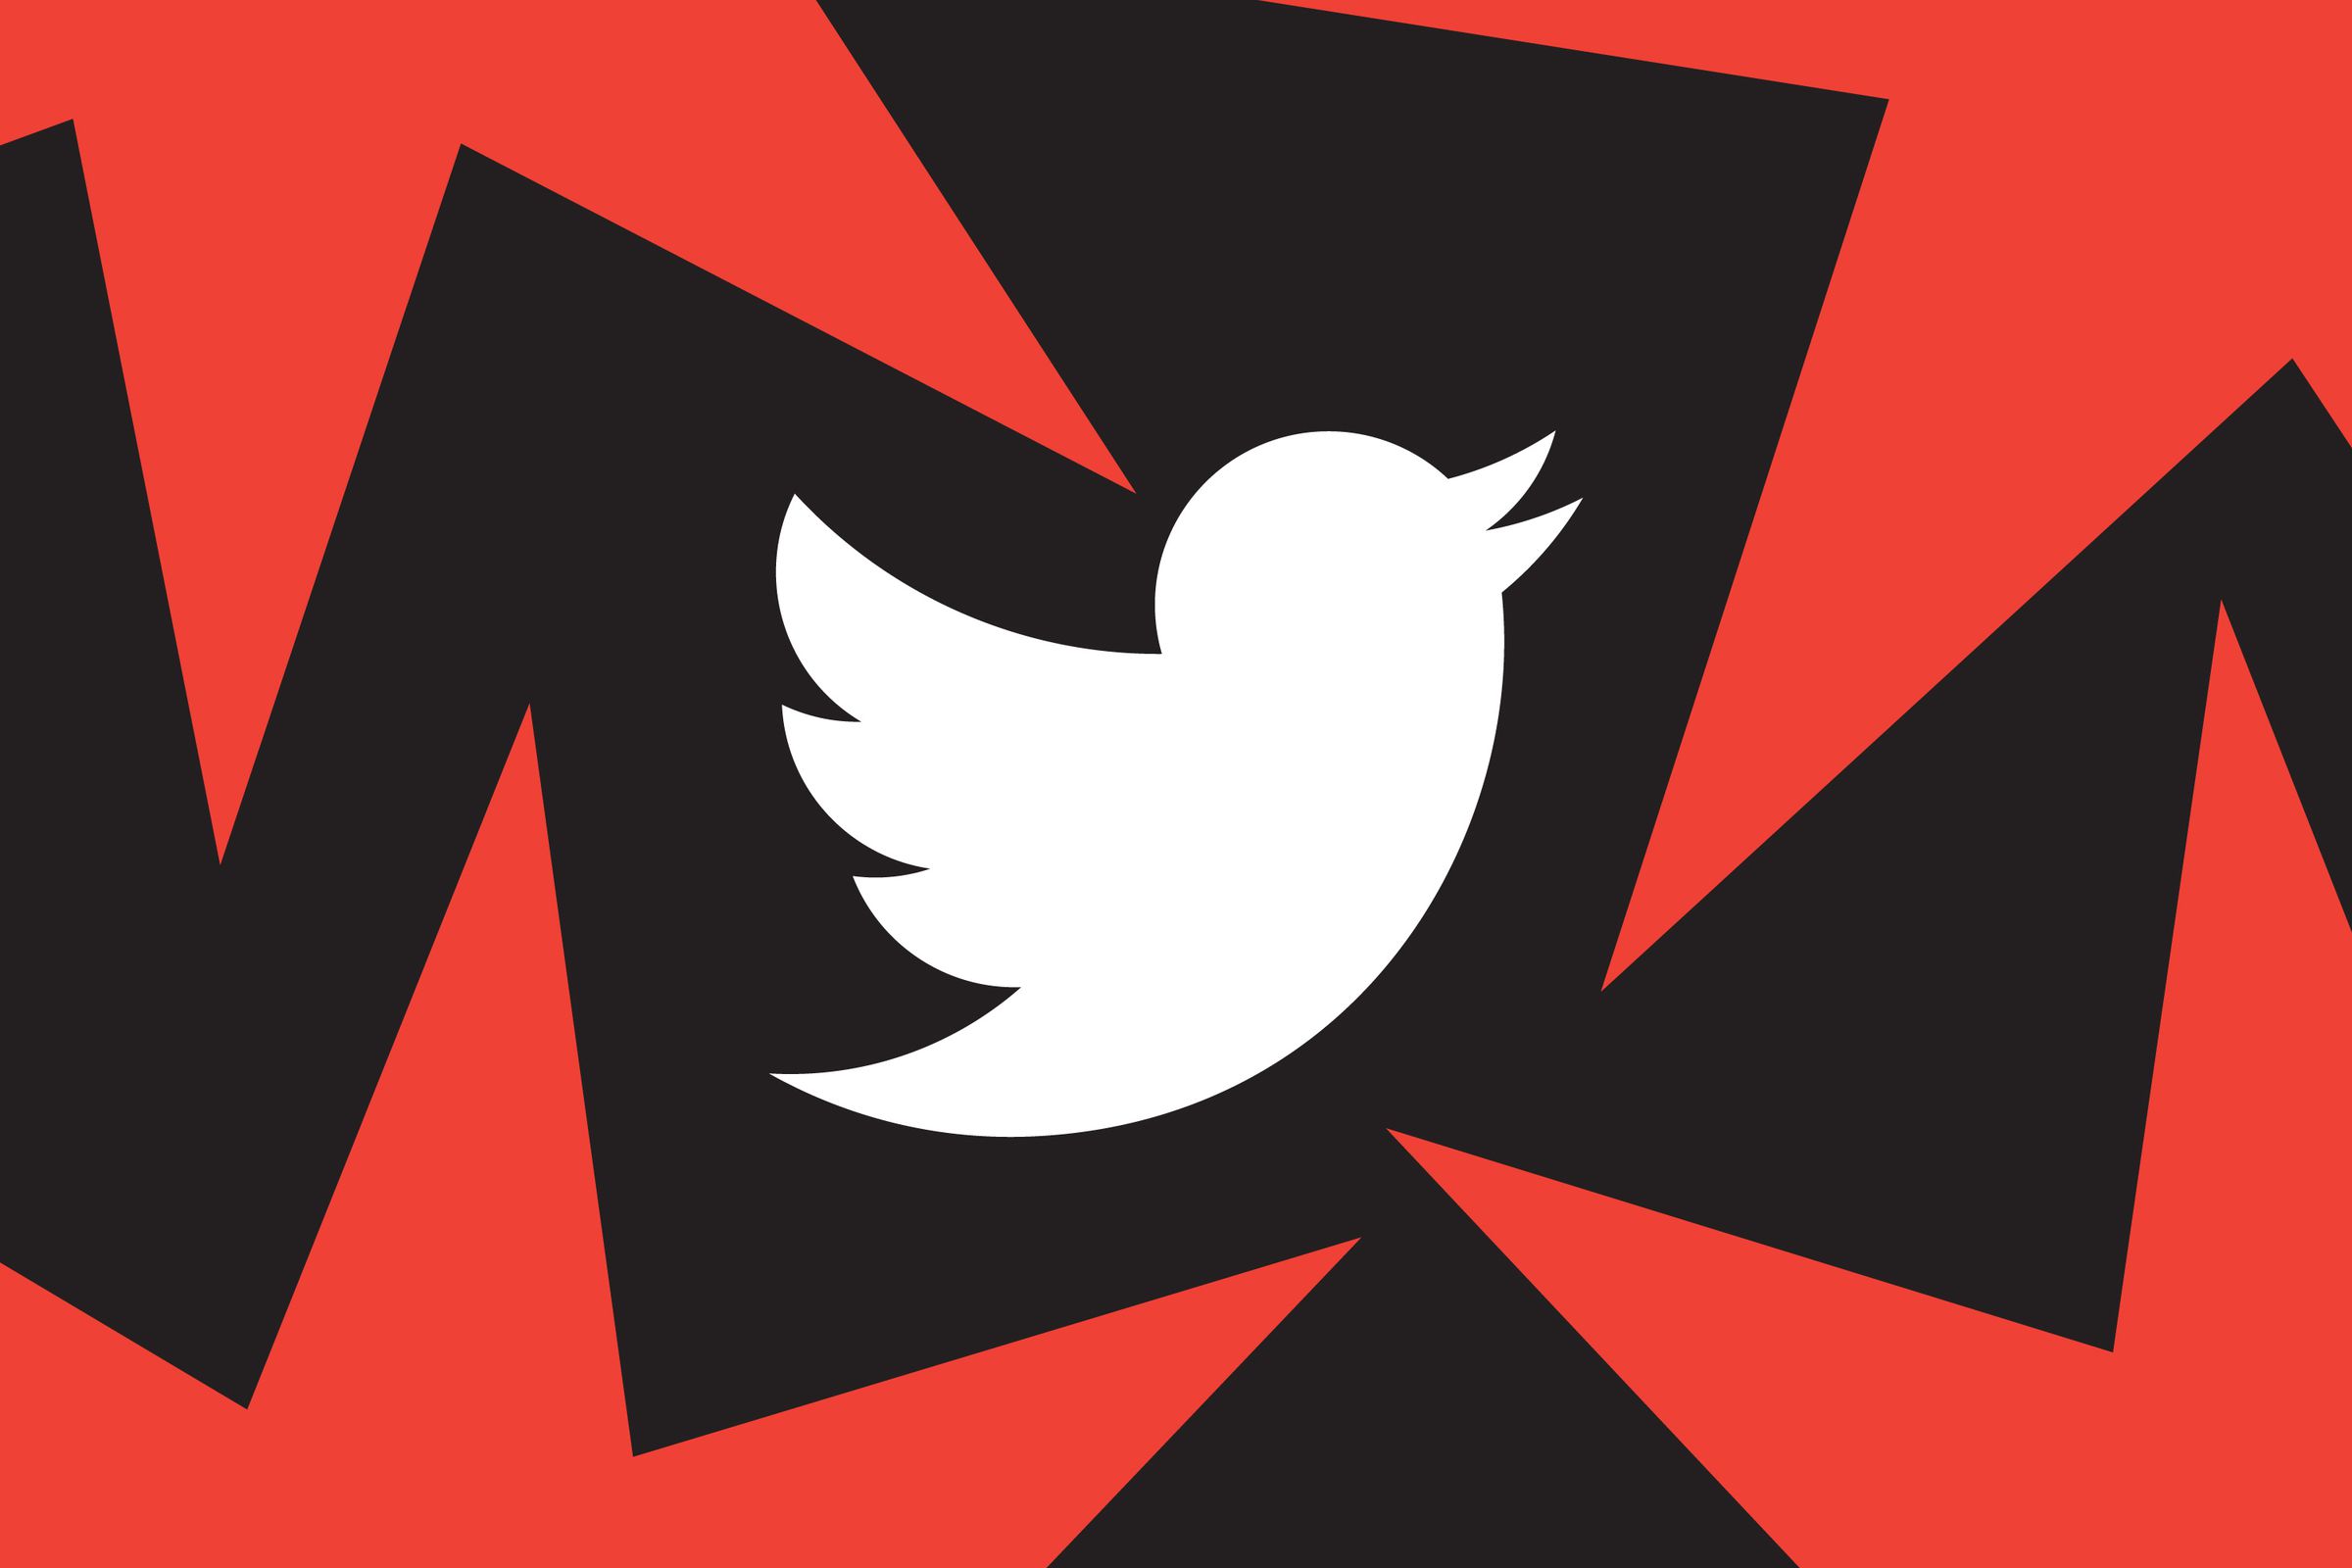 The old Twitter logo on a red and black background.